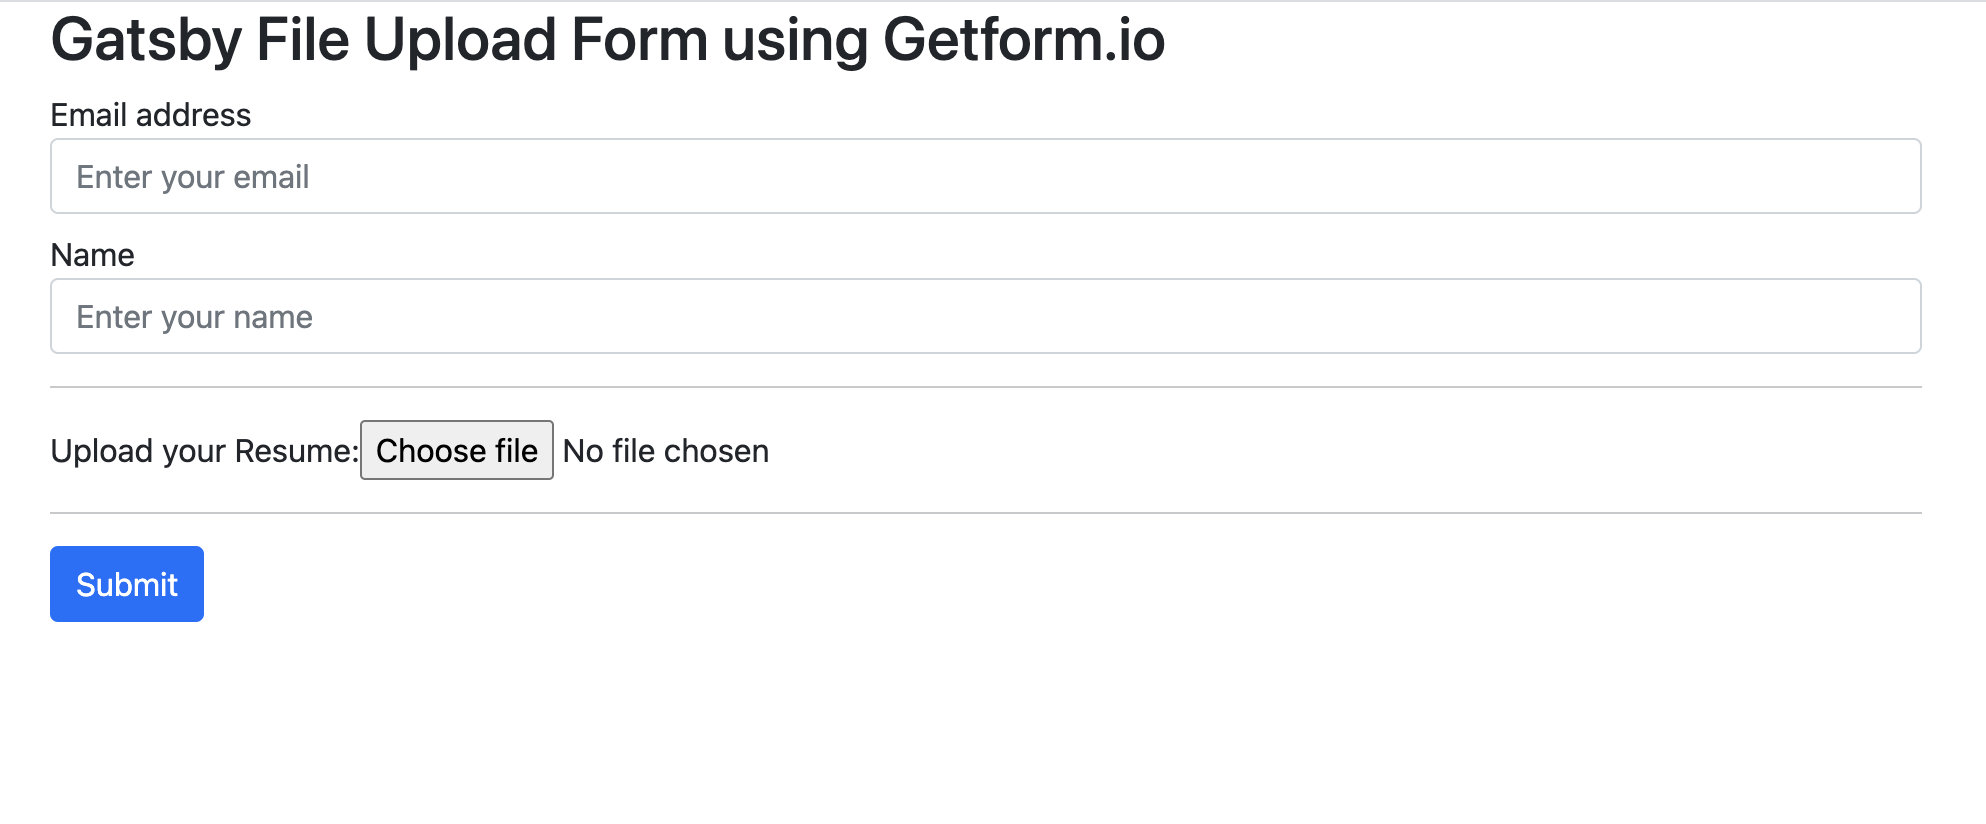 How to create a file upload form in Gatsby.js